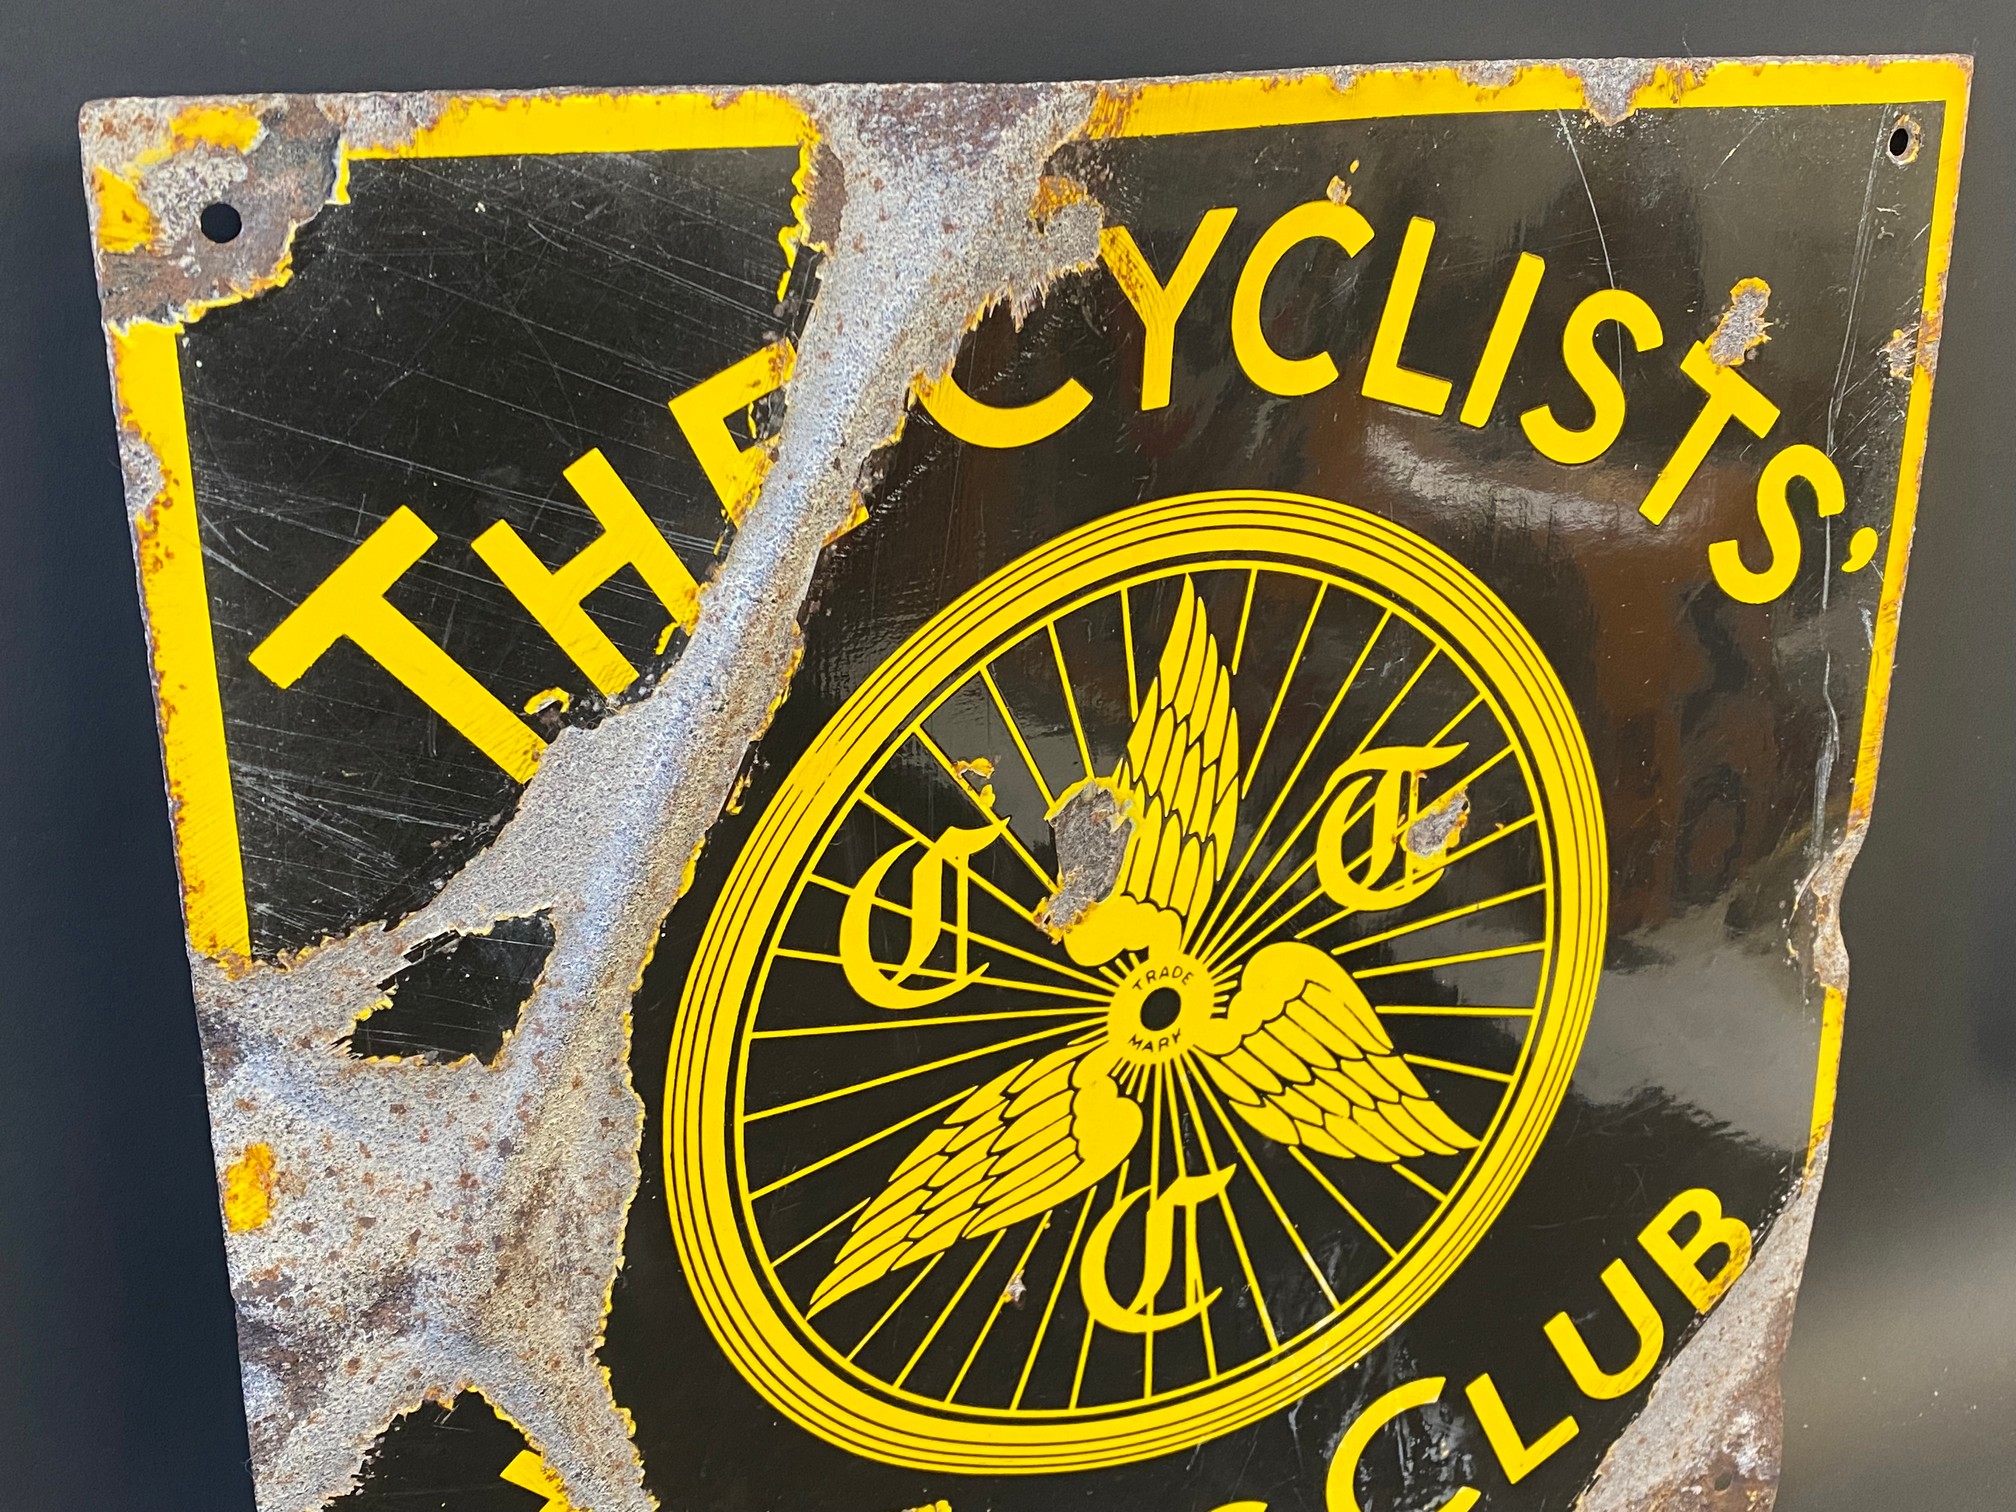 A Cyclists' Touring Club enamel sign, 16 x 16". - Image 2 of 3